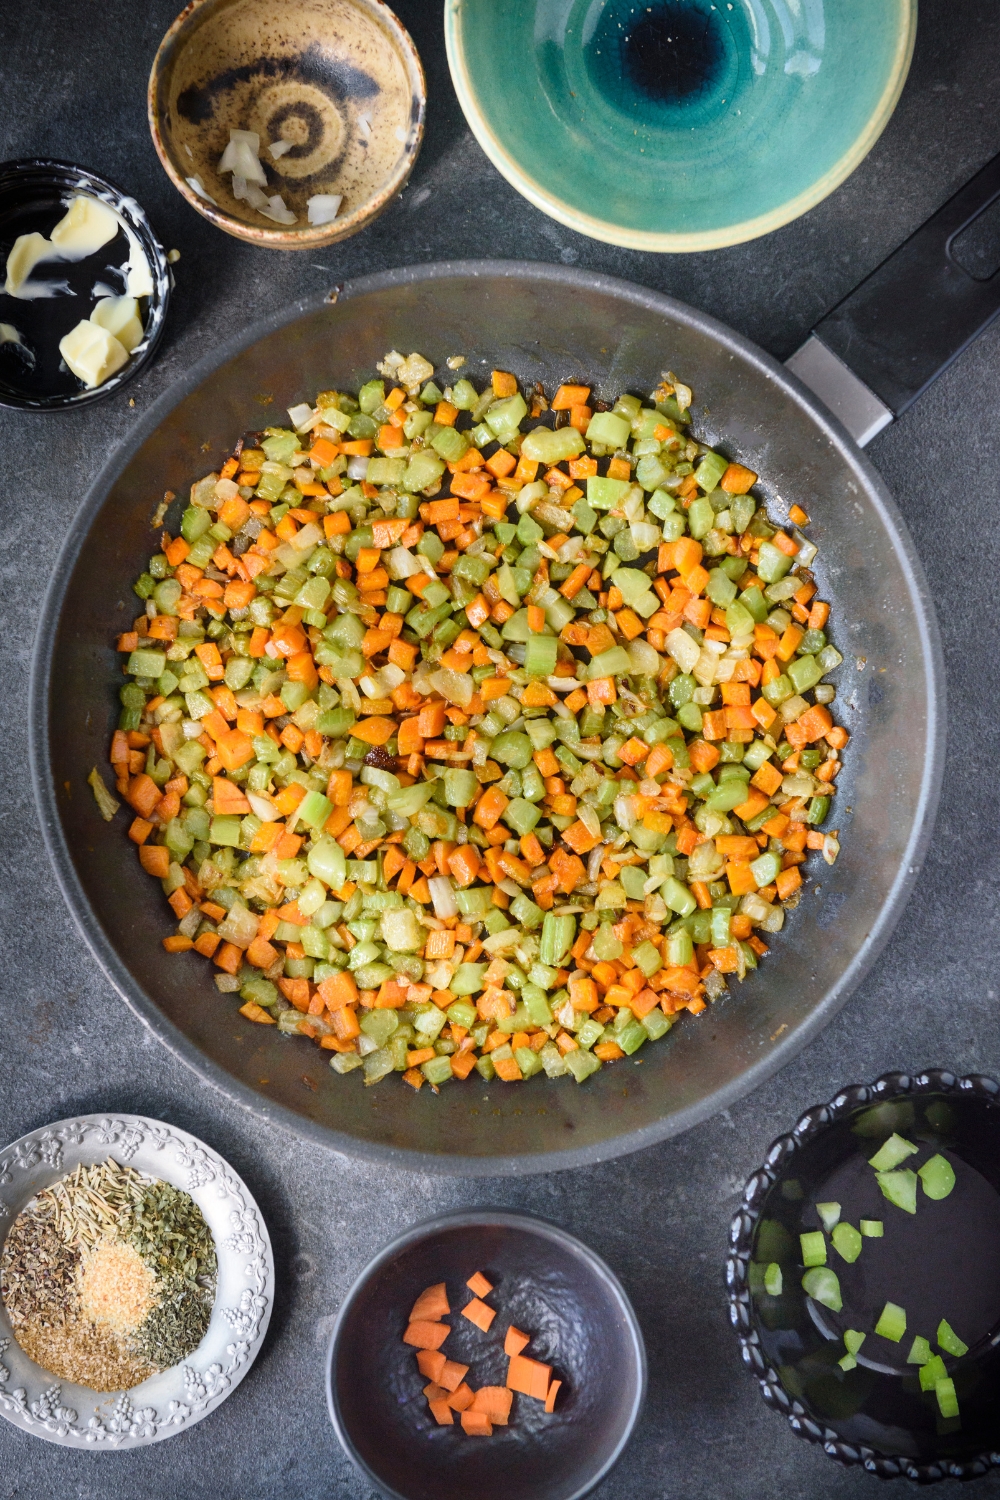 A skillet with diced celery, carrots, and onion cooking in it.